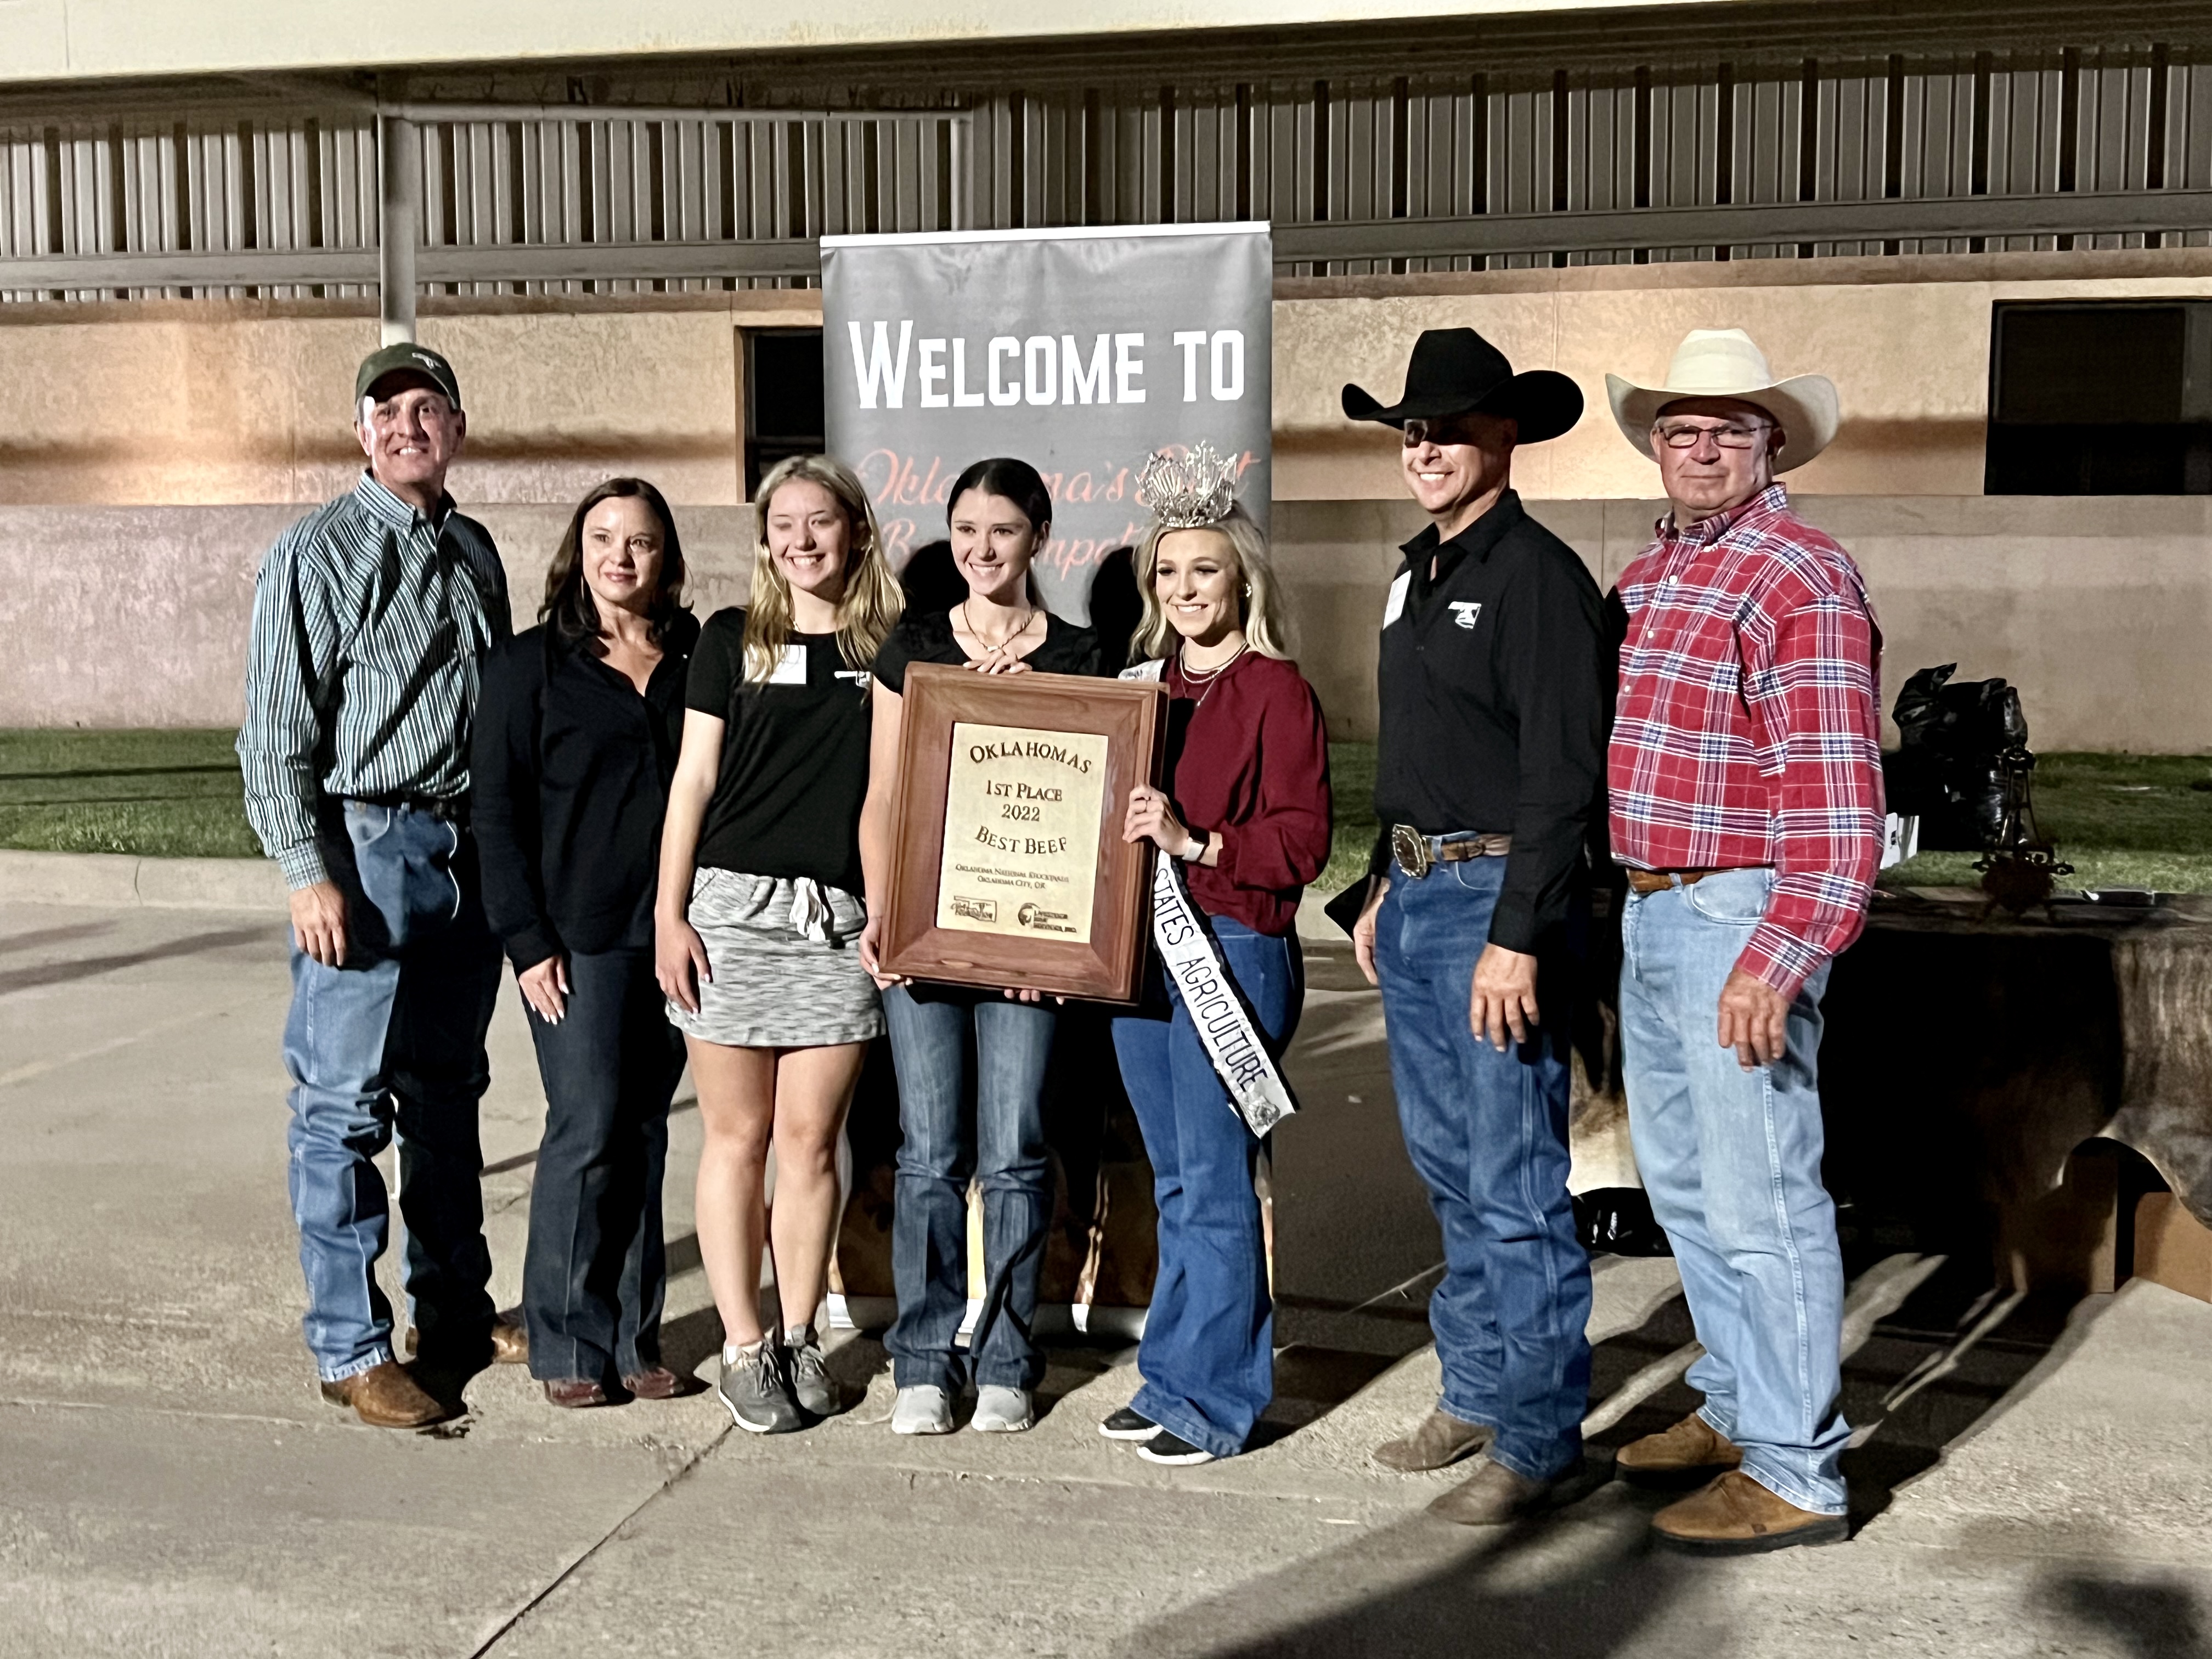 Oklahoma Beef Market LLC and 4T Ranch Win Inaugural Stockyards Steak Out Awards